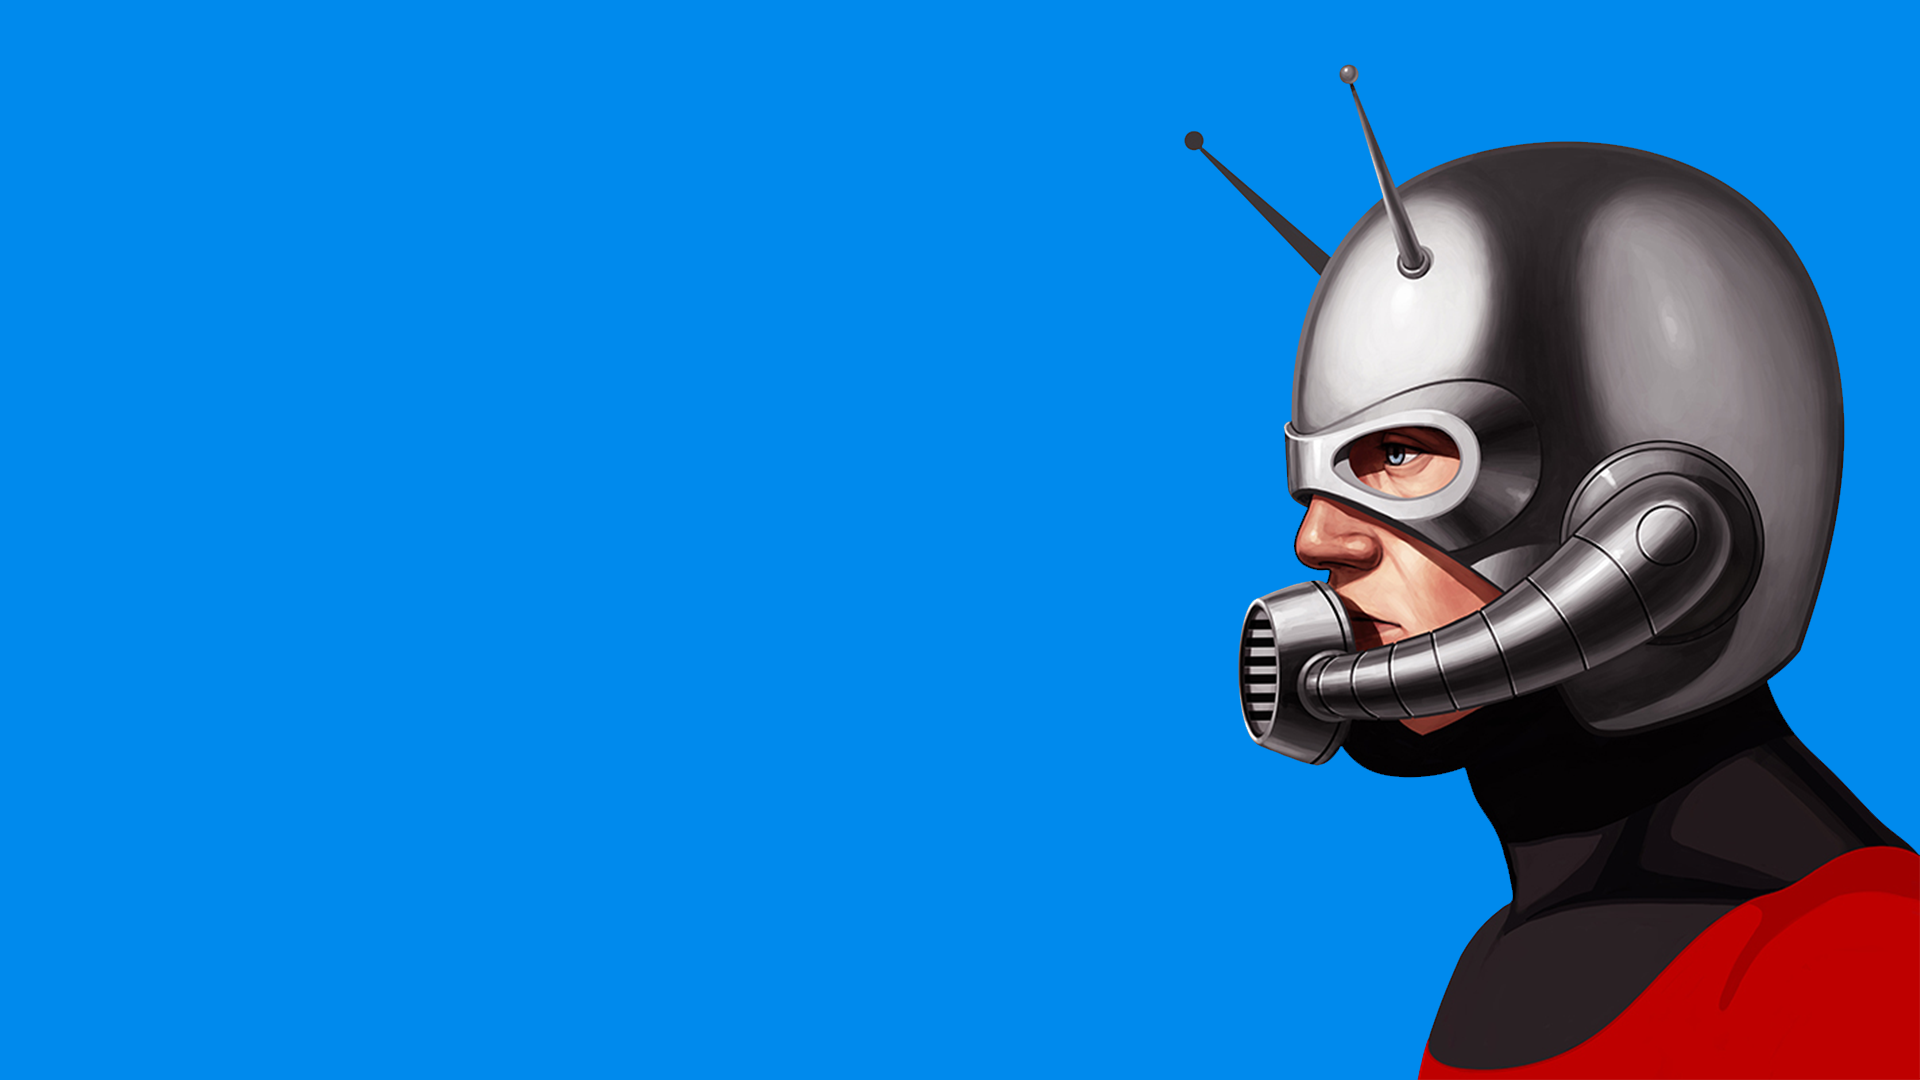 Wallpaper ID: 379581 / Movie Ant-Man and the Wasp Phone Wallpaper, Ant-Man,  1080x2160 free download